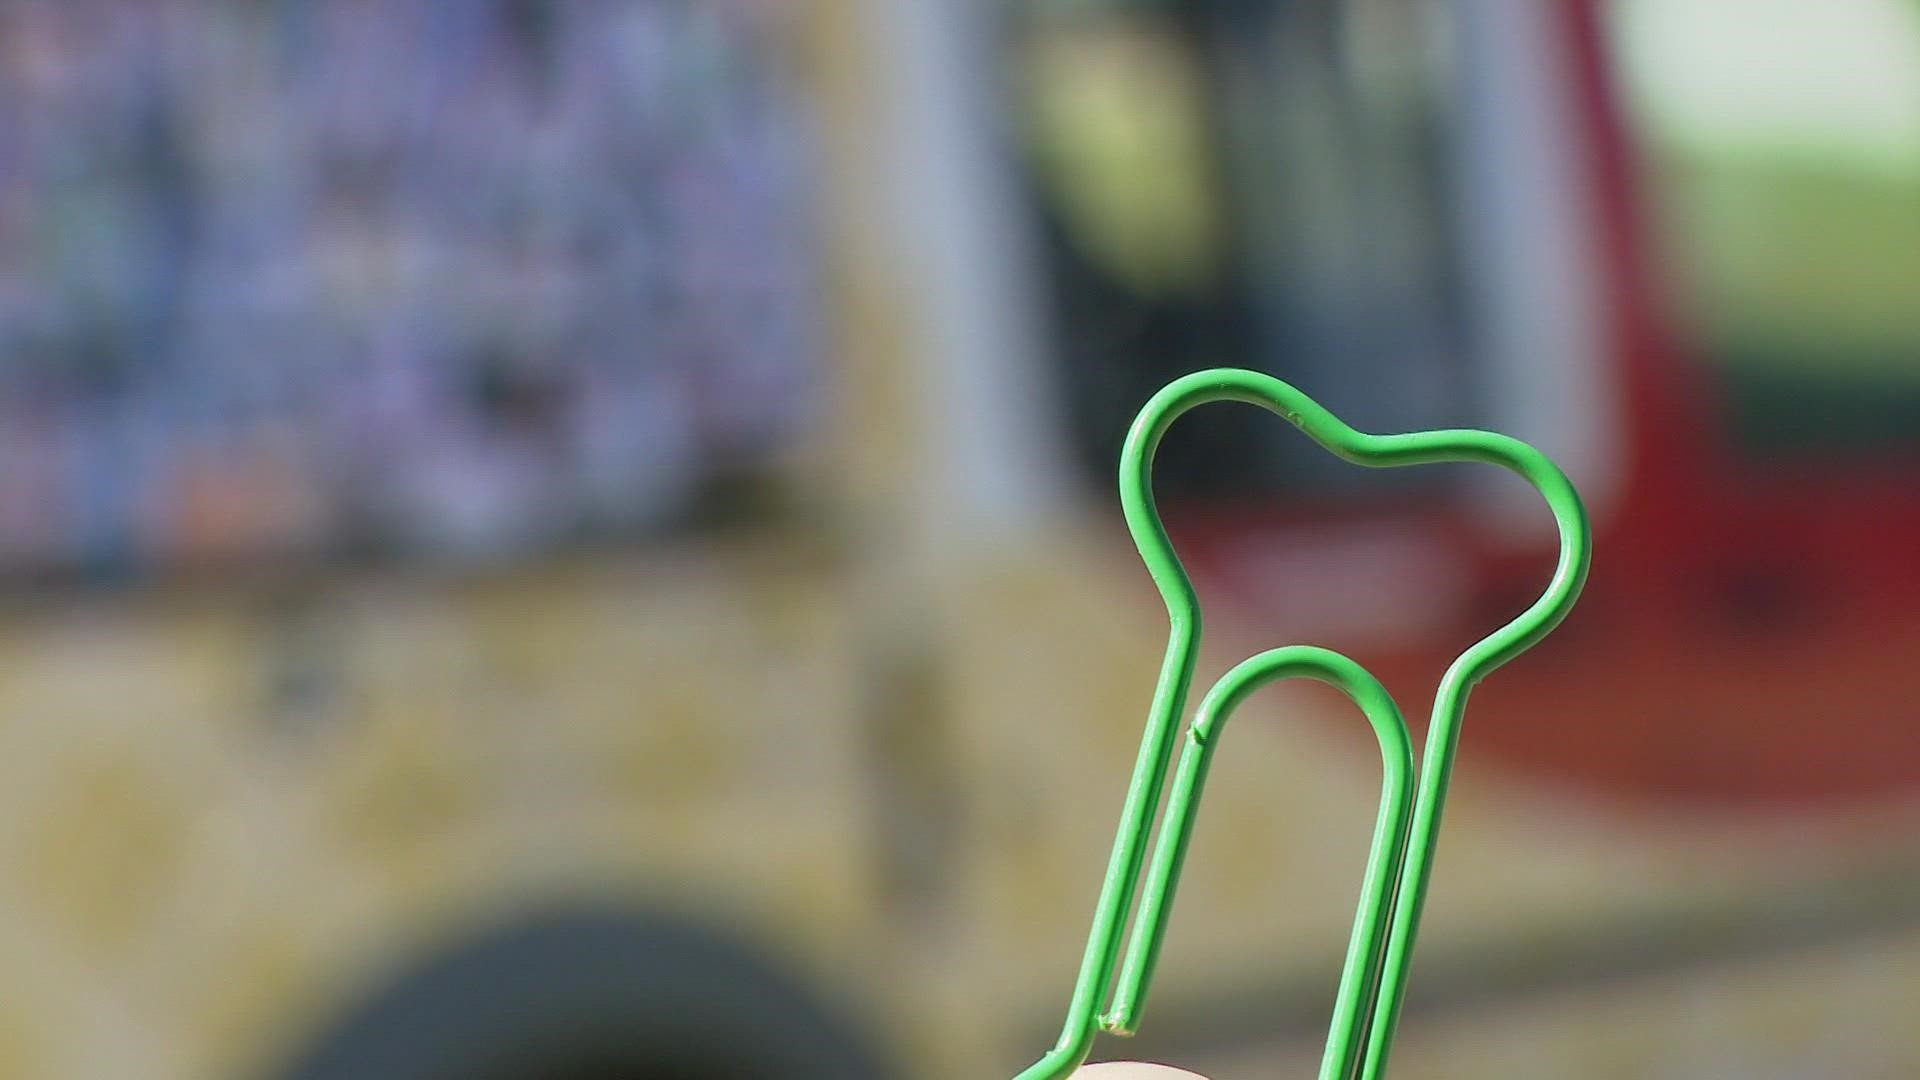 He wanted an ice cream truck, so he started a flurry of trades to get one, beginning with a paperclip.